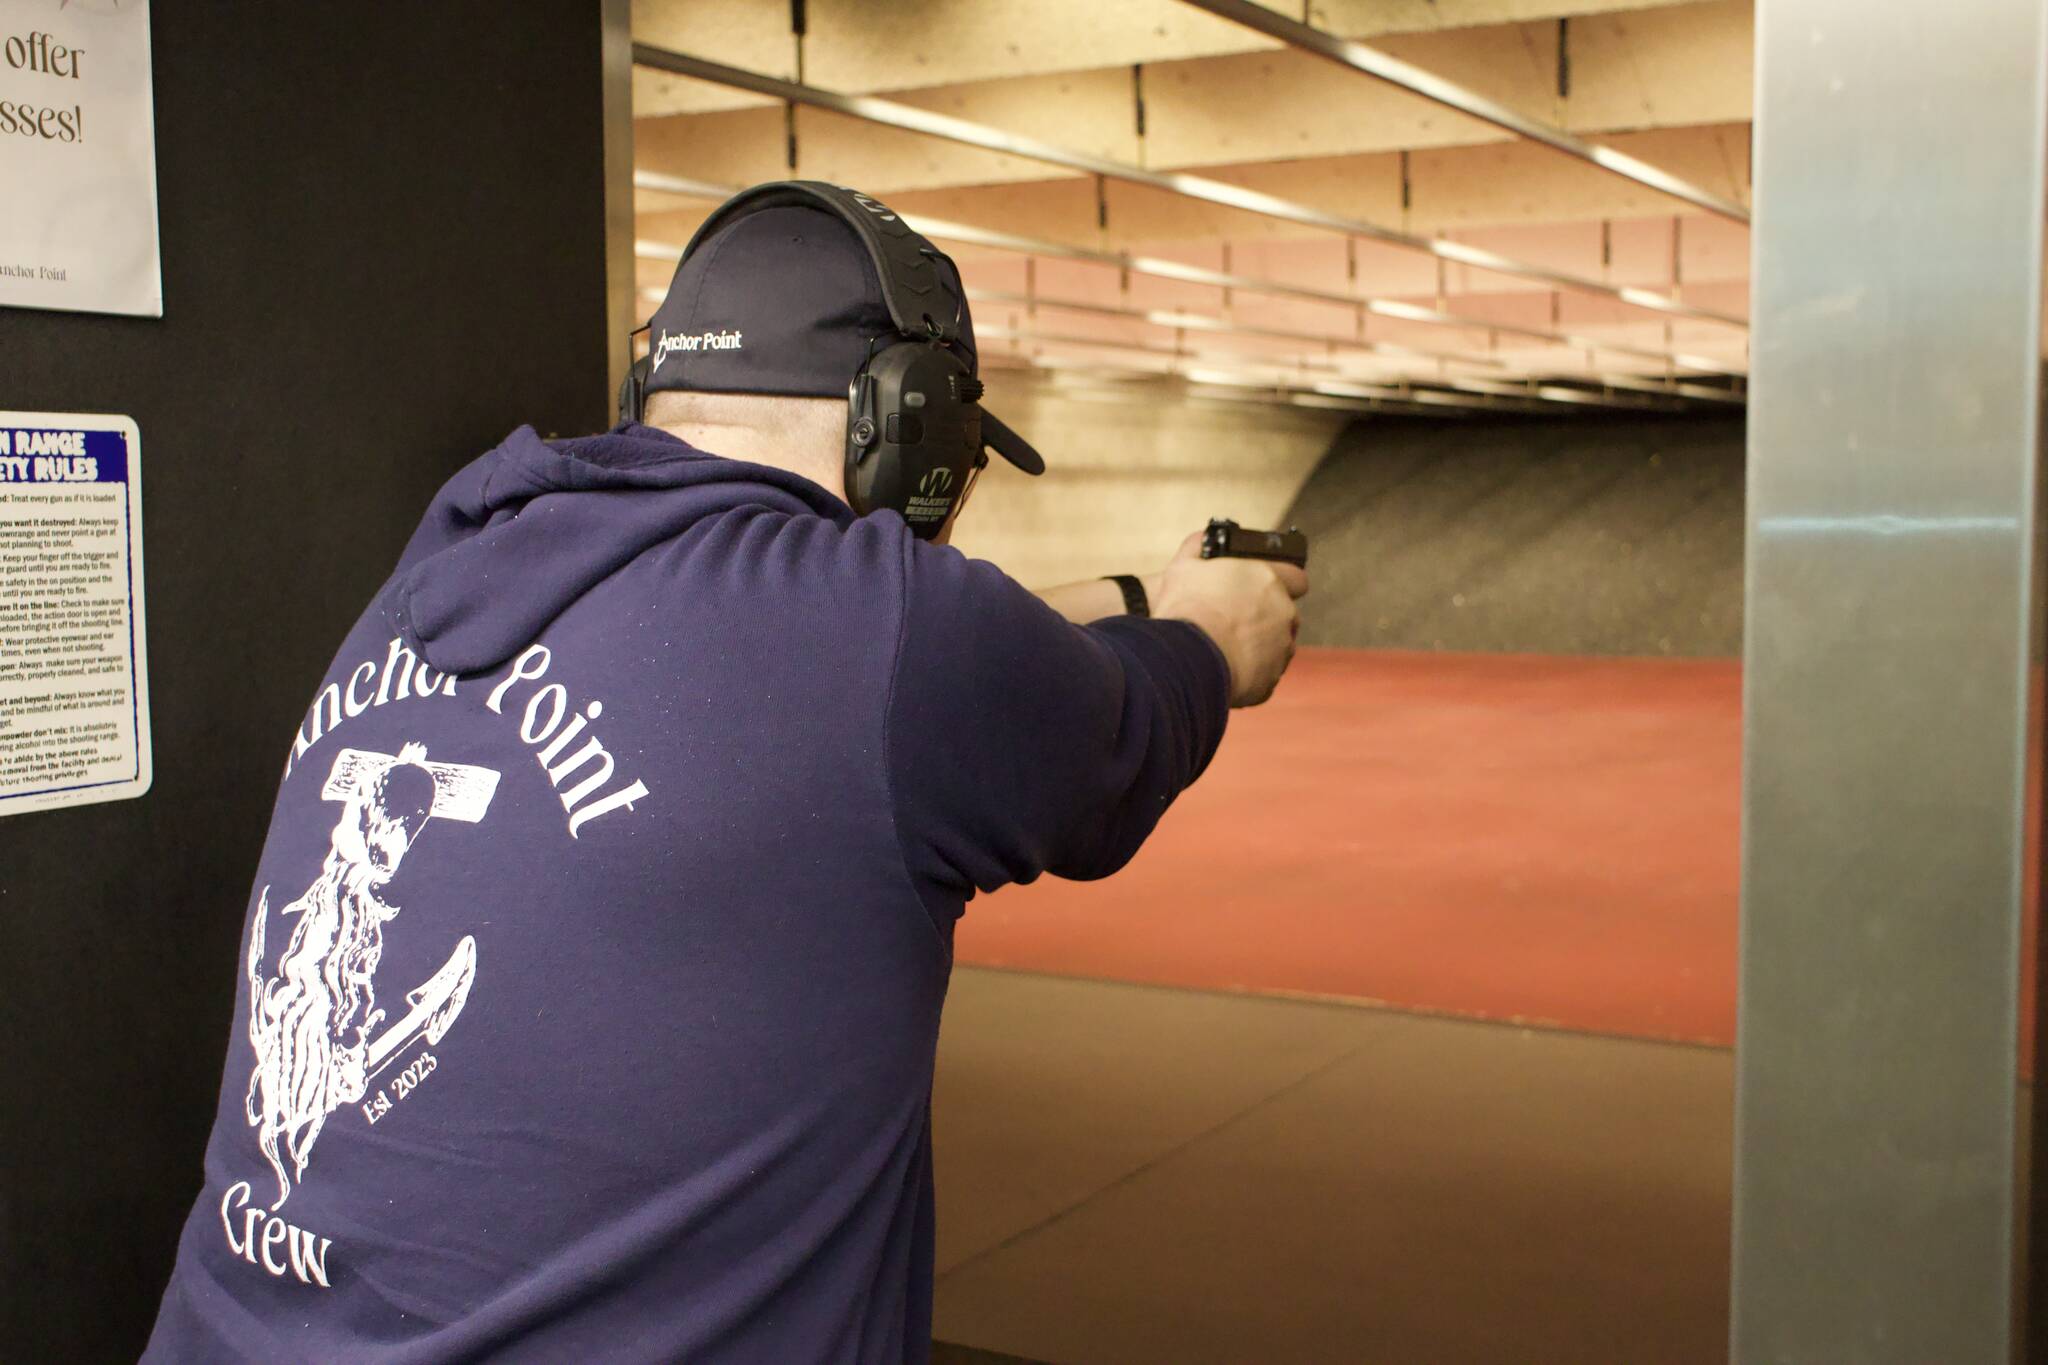 Photo by Rachel Rosen/Whidbey News-Times
Anchor Point sells firearms and has a shooting range.